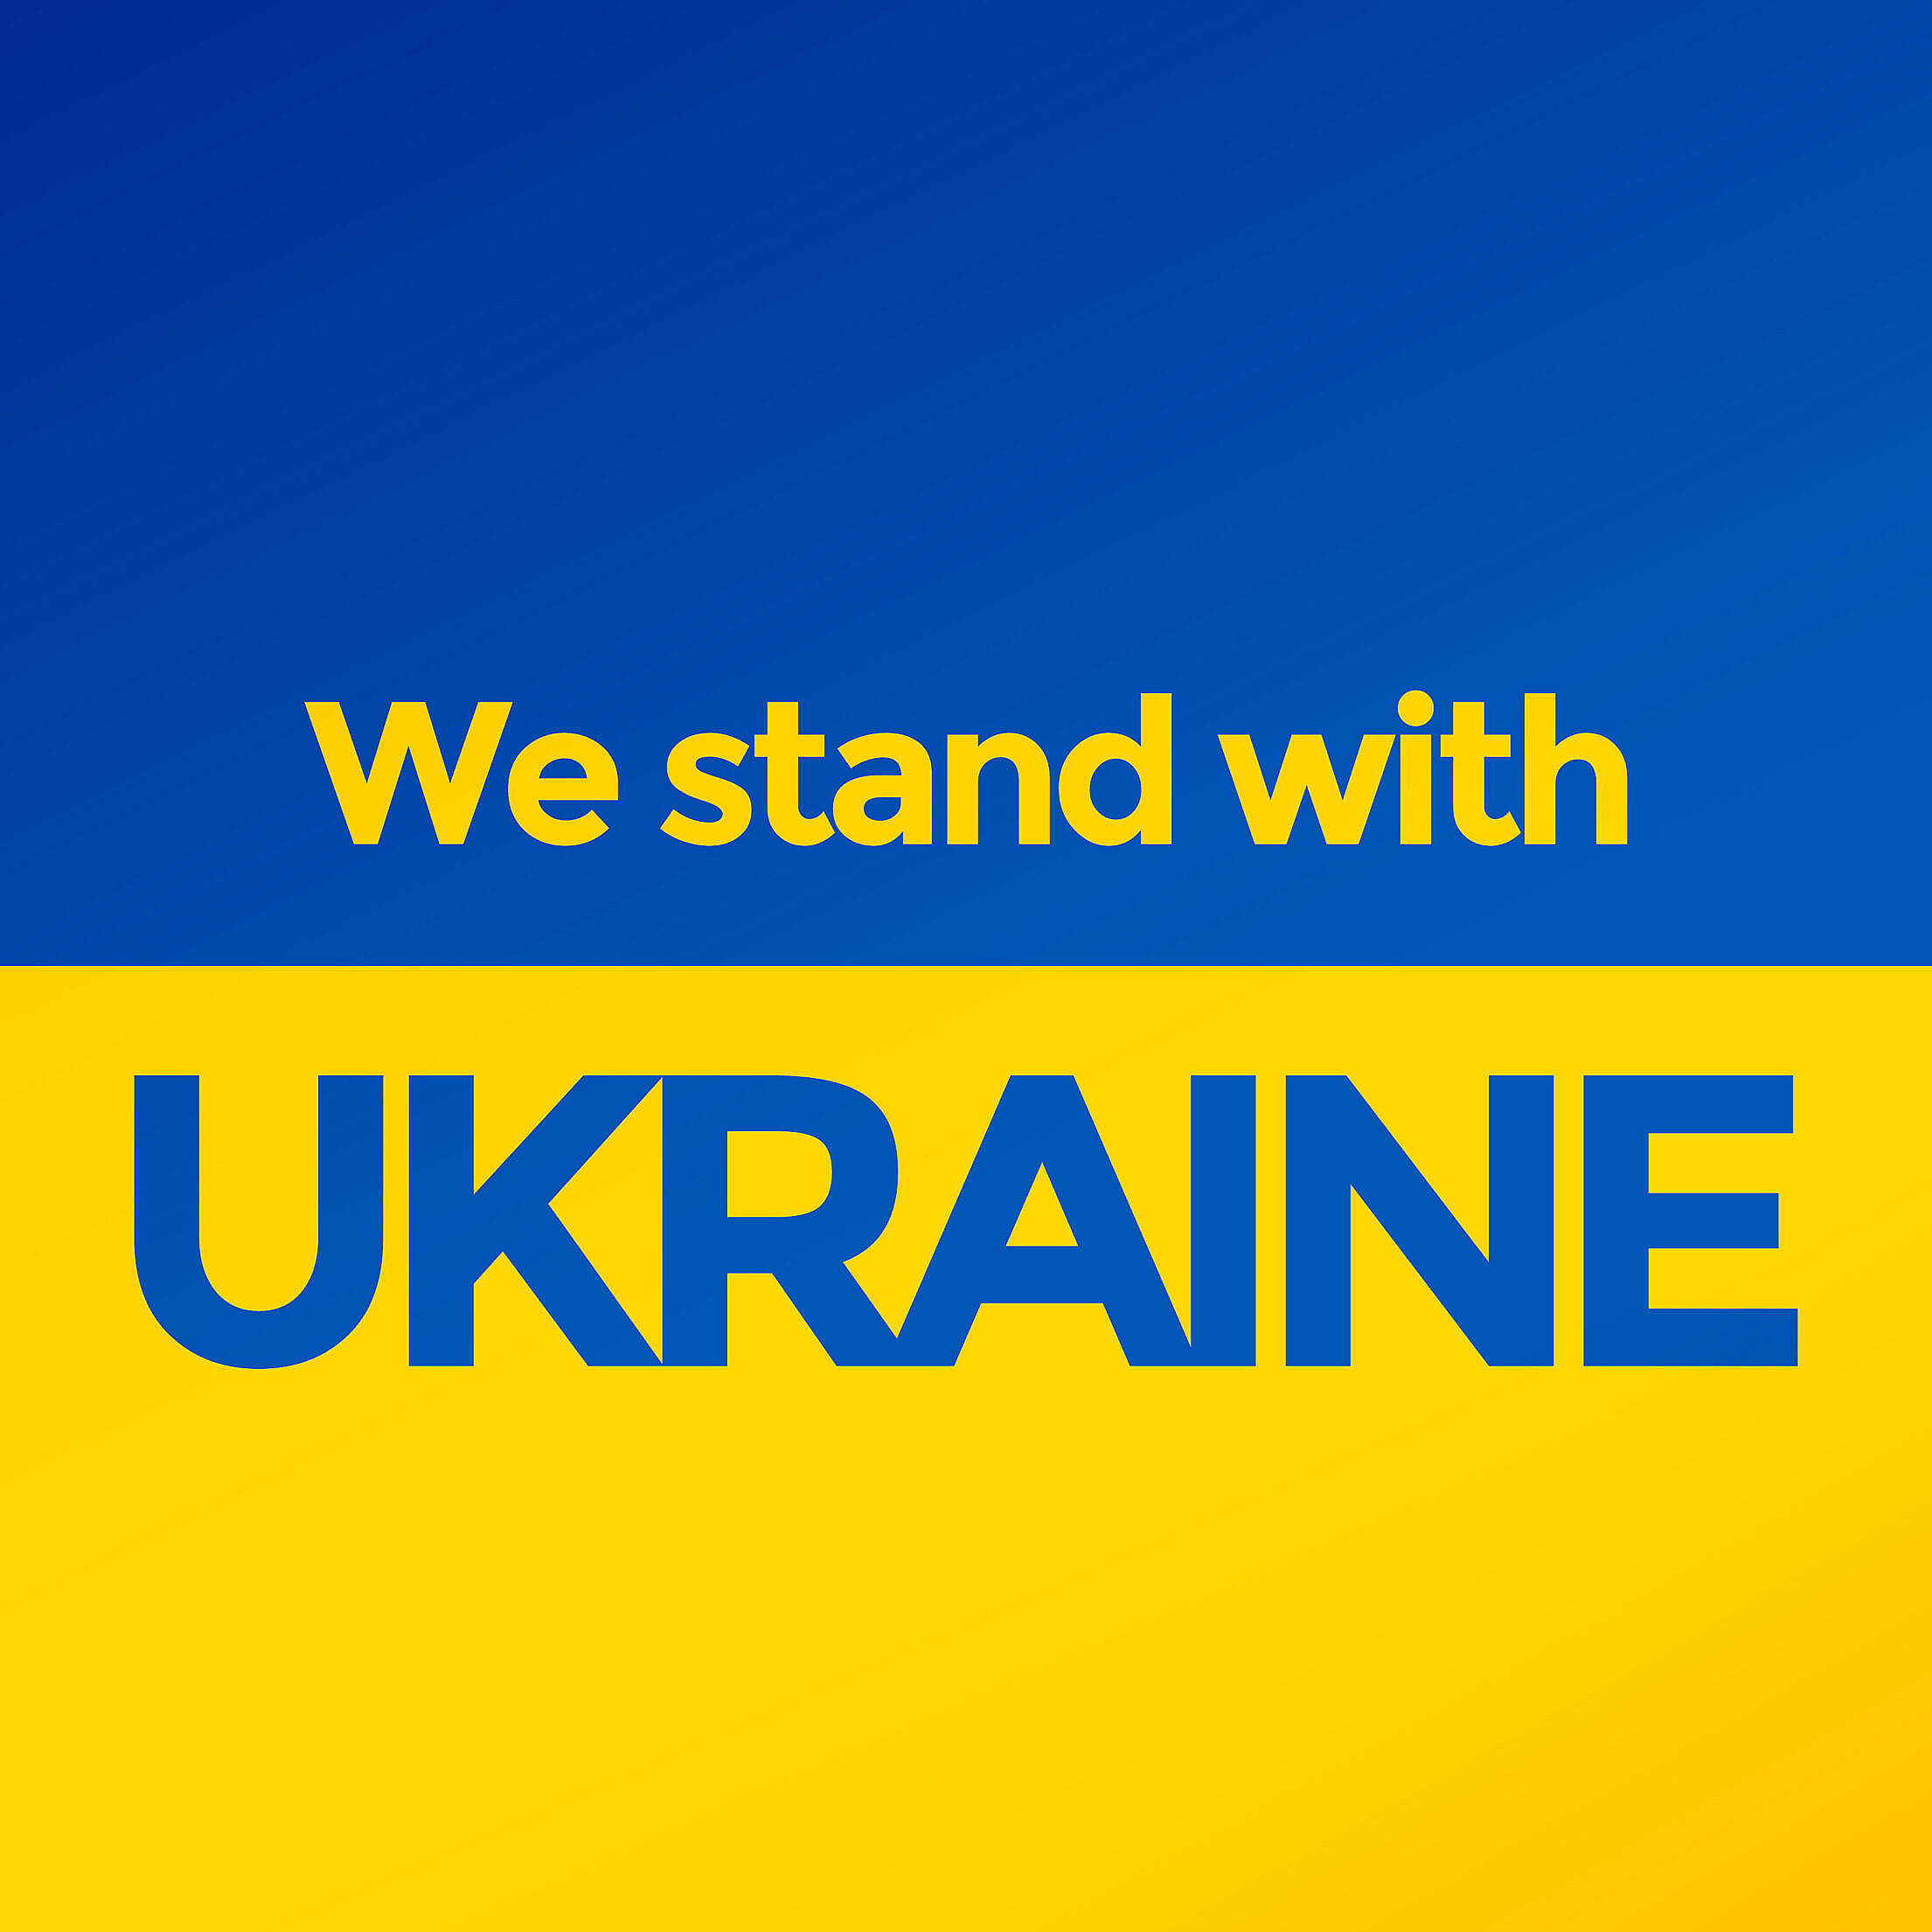 We Stand with Ukraine Profile Picture for Social Media Free Stock Photo